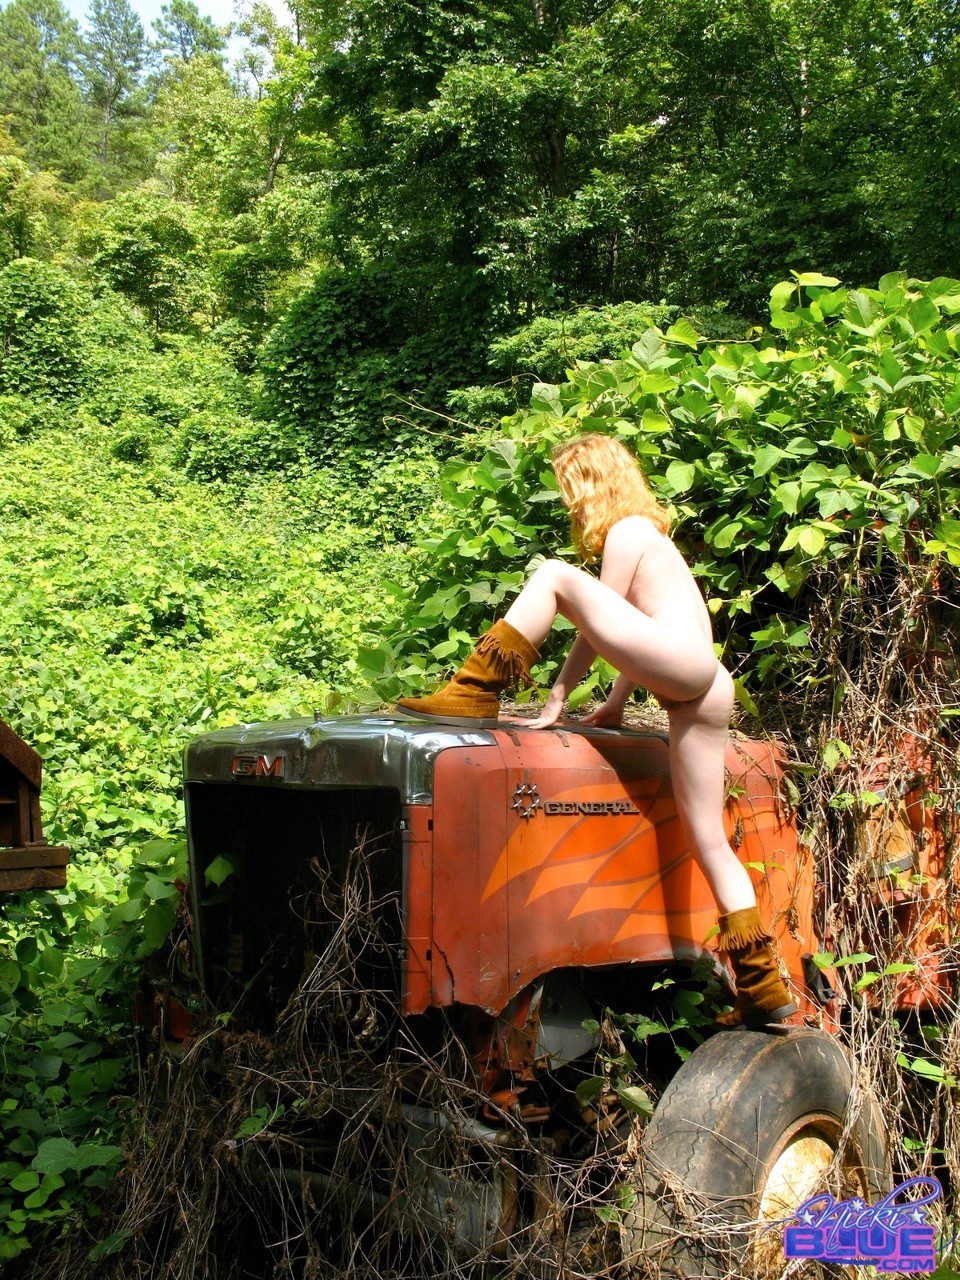 Amateur babe in boots Nicki Blue strips and poses on a tractor in the forest foto pornográfica #424040516 | Pornstar Platinum Pics, Nicki Blue, Outdoor, pornografia móvel